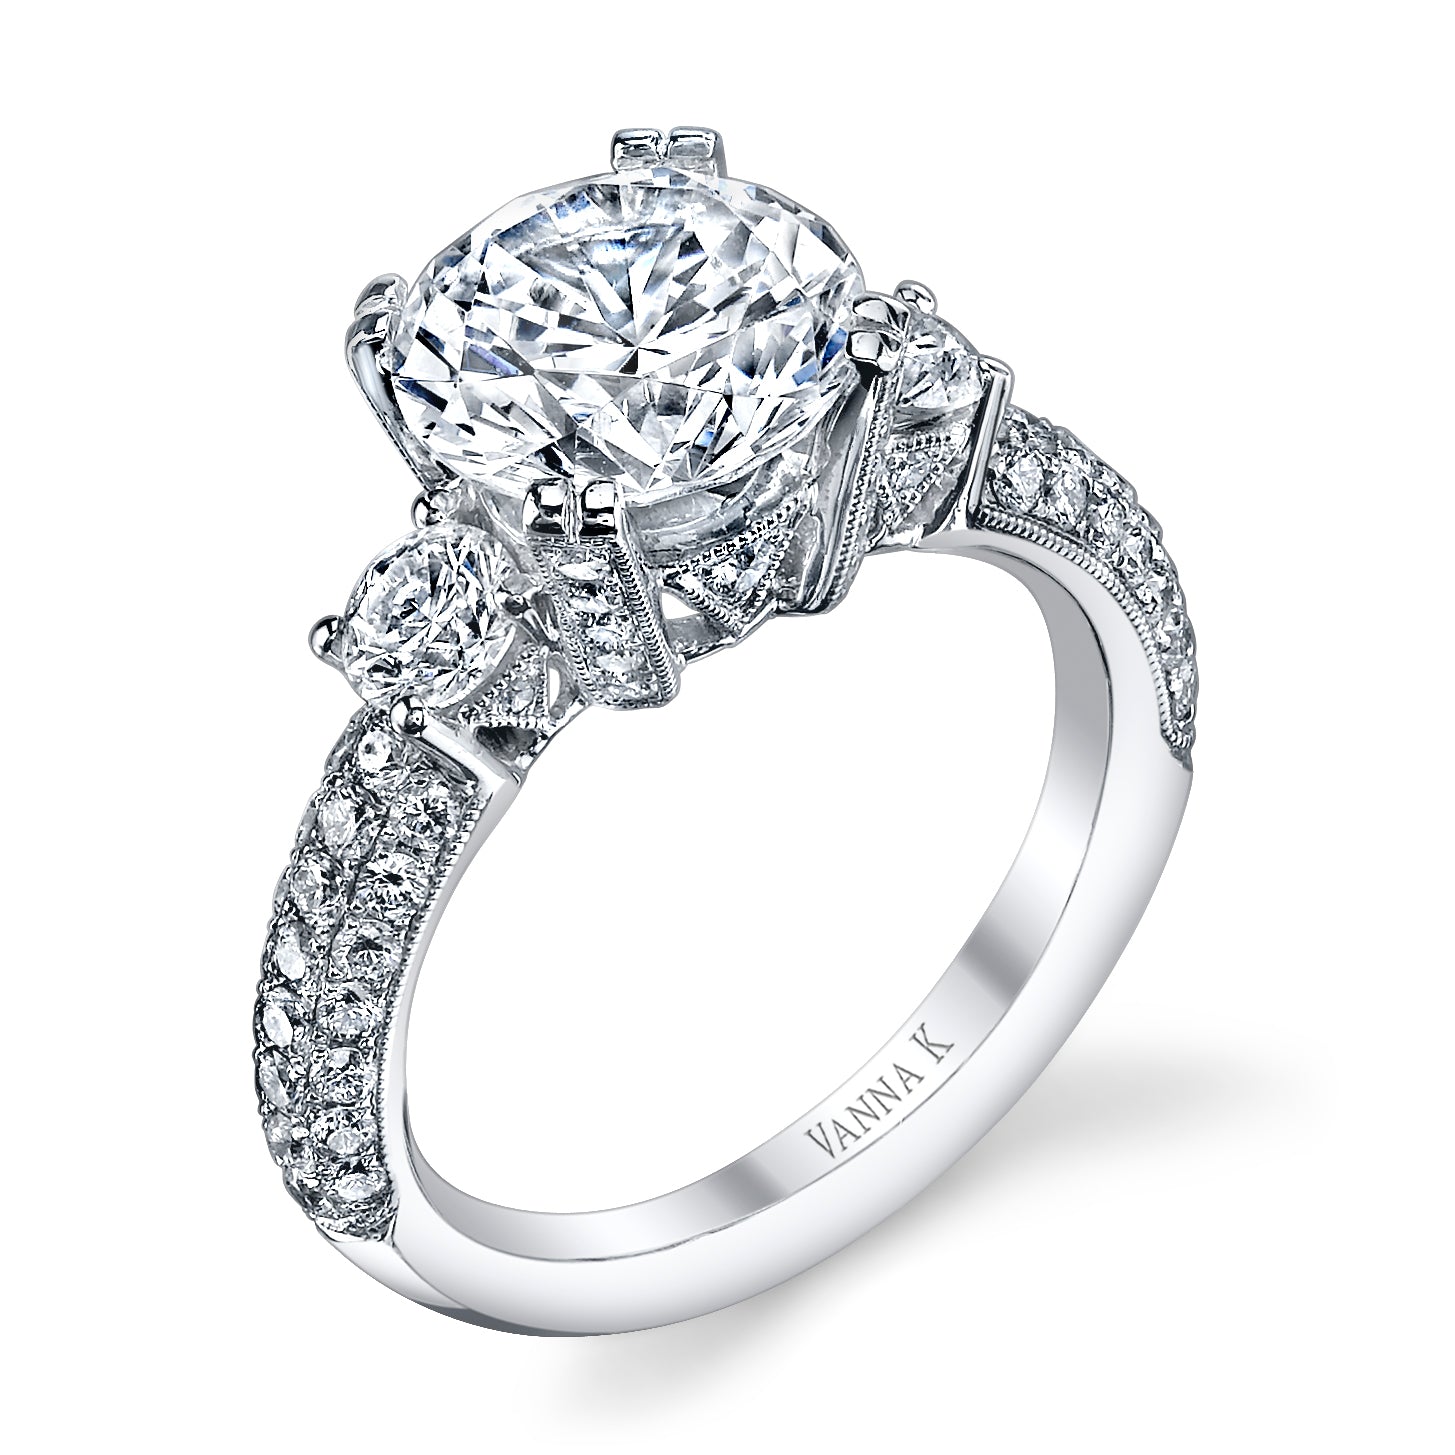 Triple the Dazzle with This Three Stone Ring!